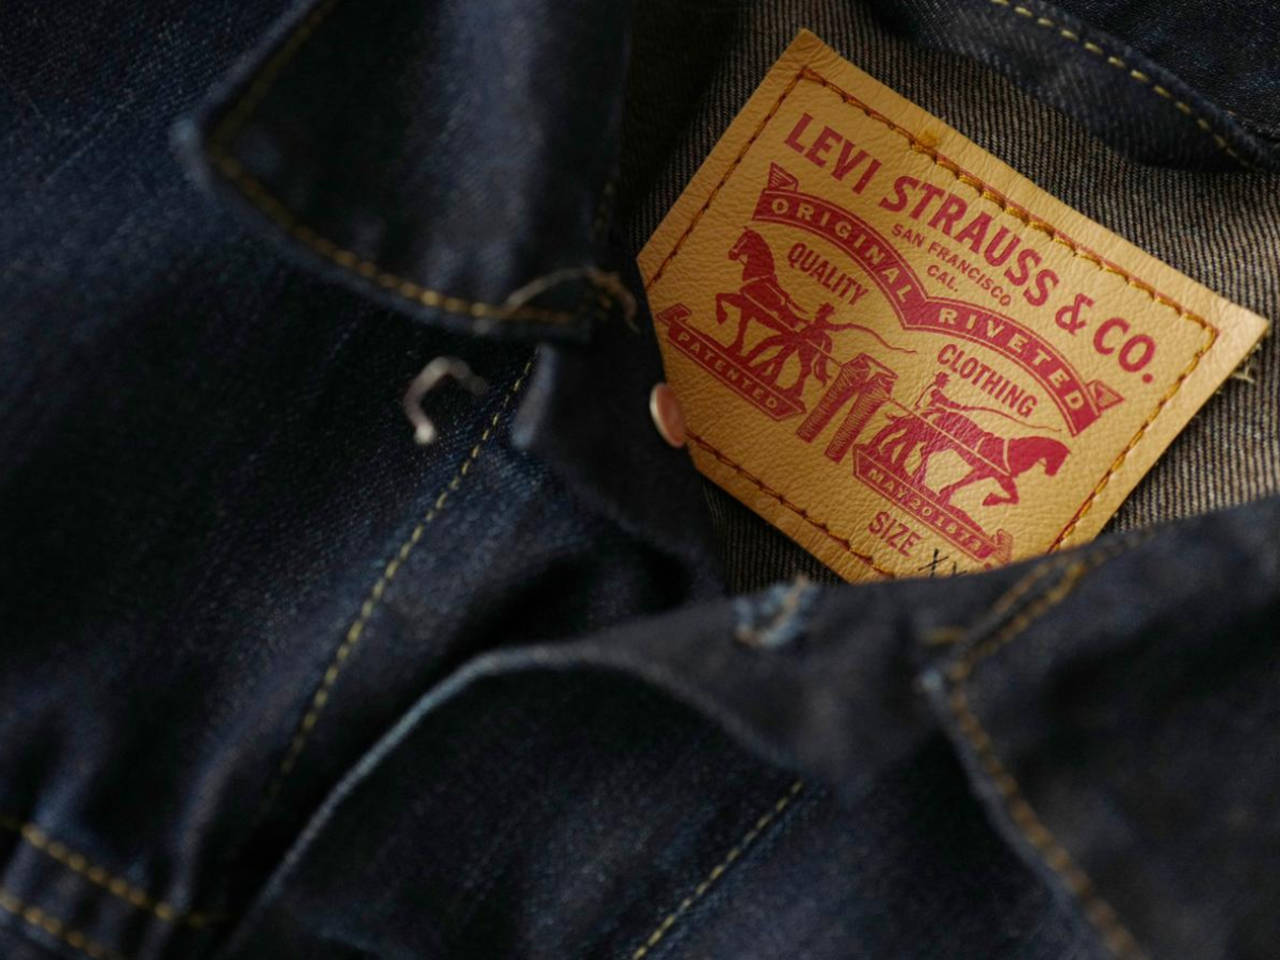 Levis's to reduce greenhouse emissions by 90% - Times of India